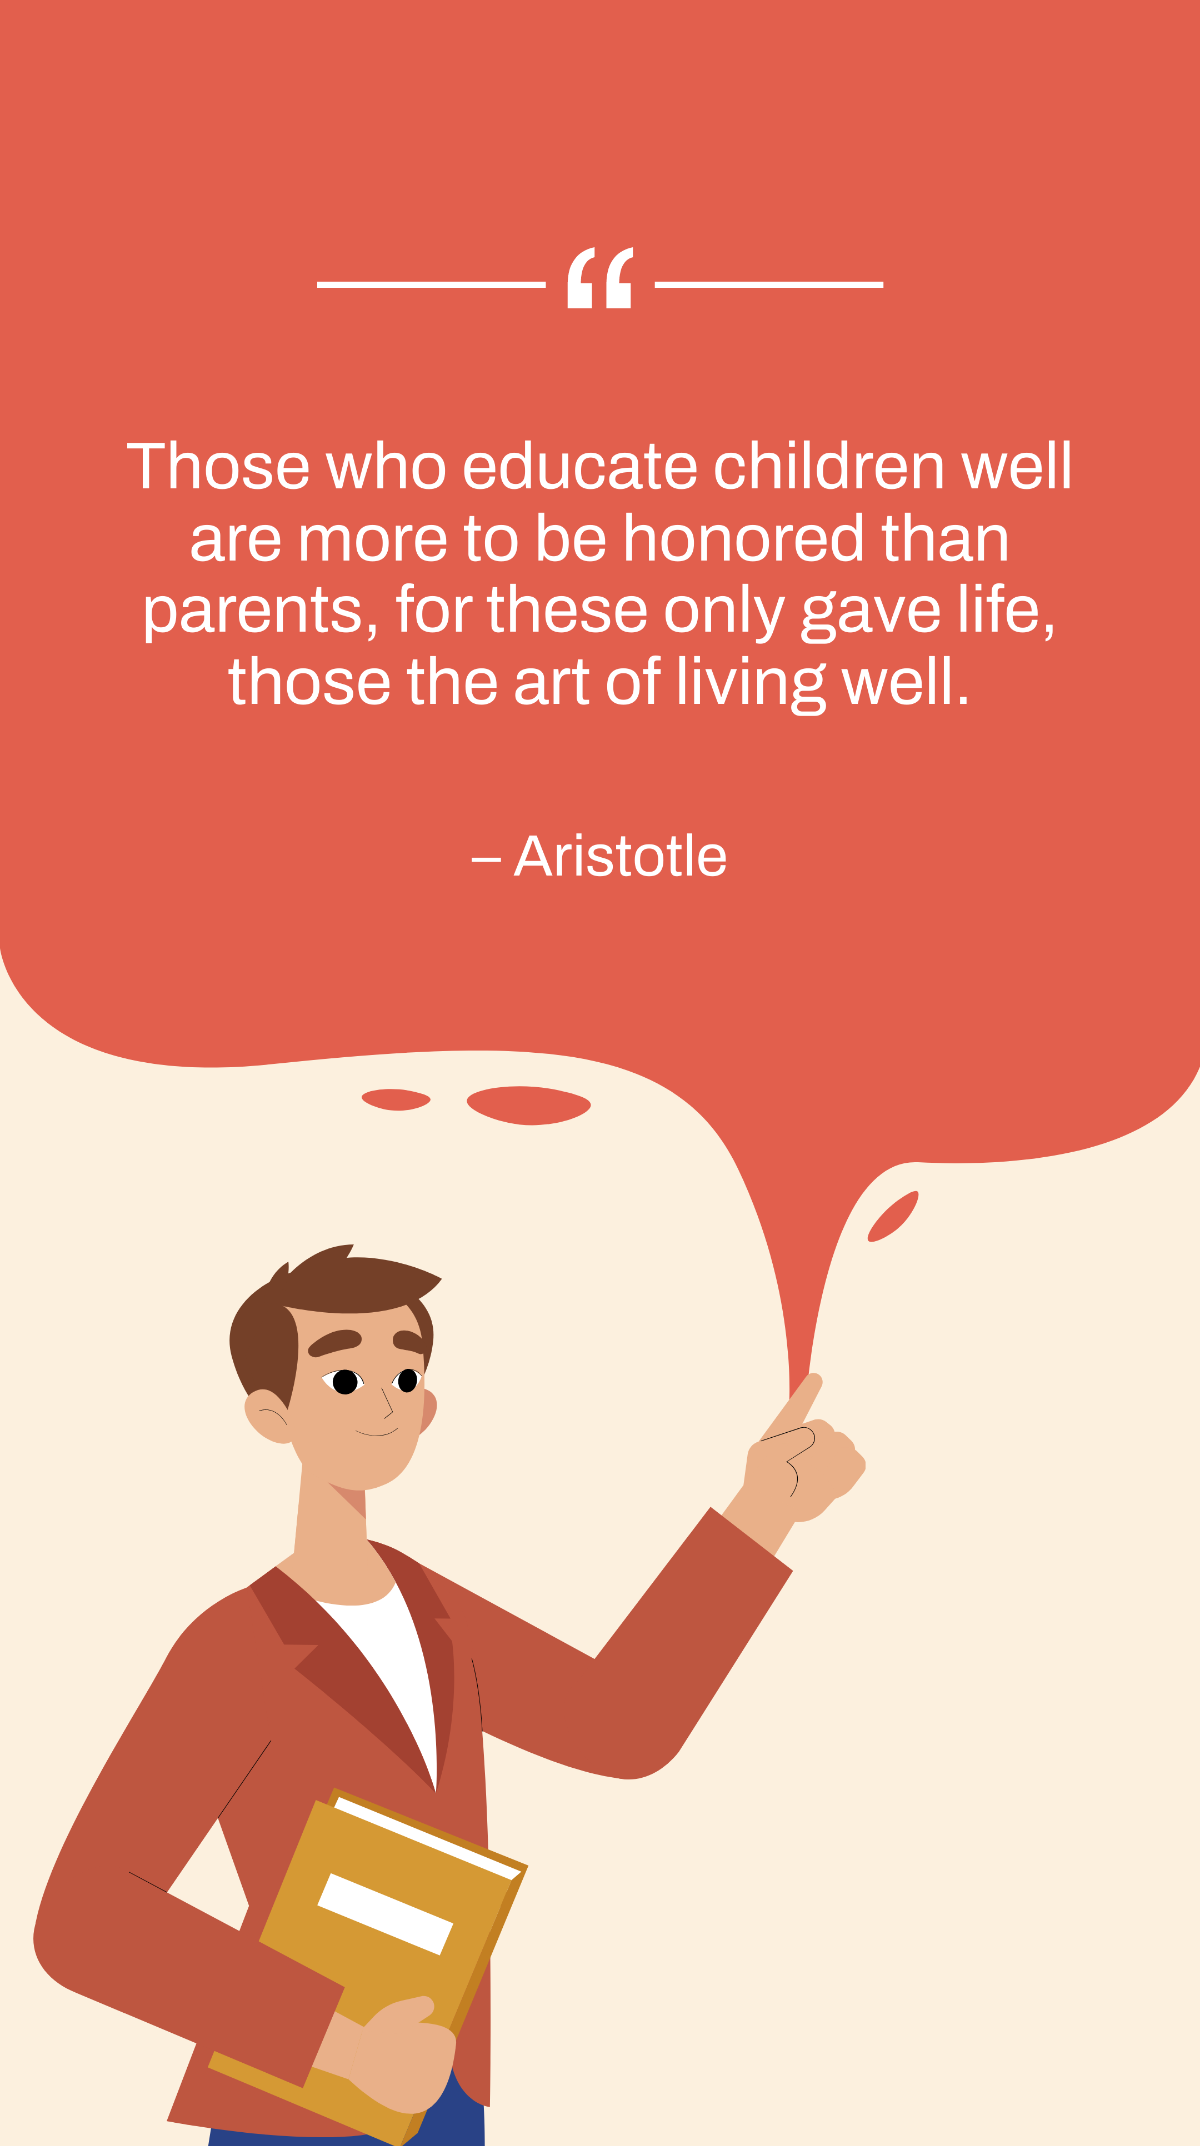 Free Aristotle - Those who educate children well are more to be honored than parents, for these only gave life, those the art of living well. Template